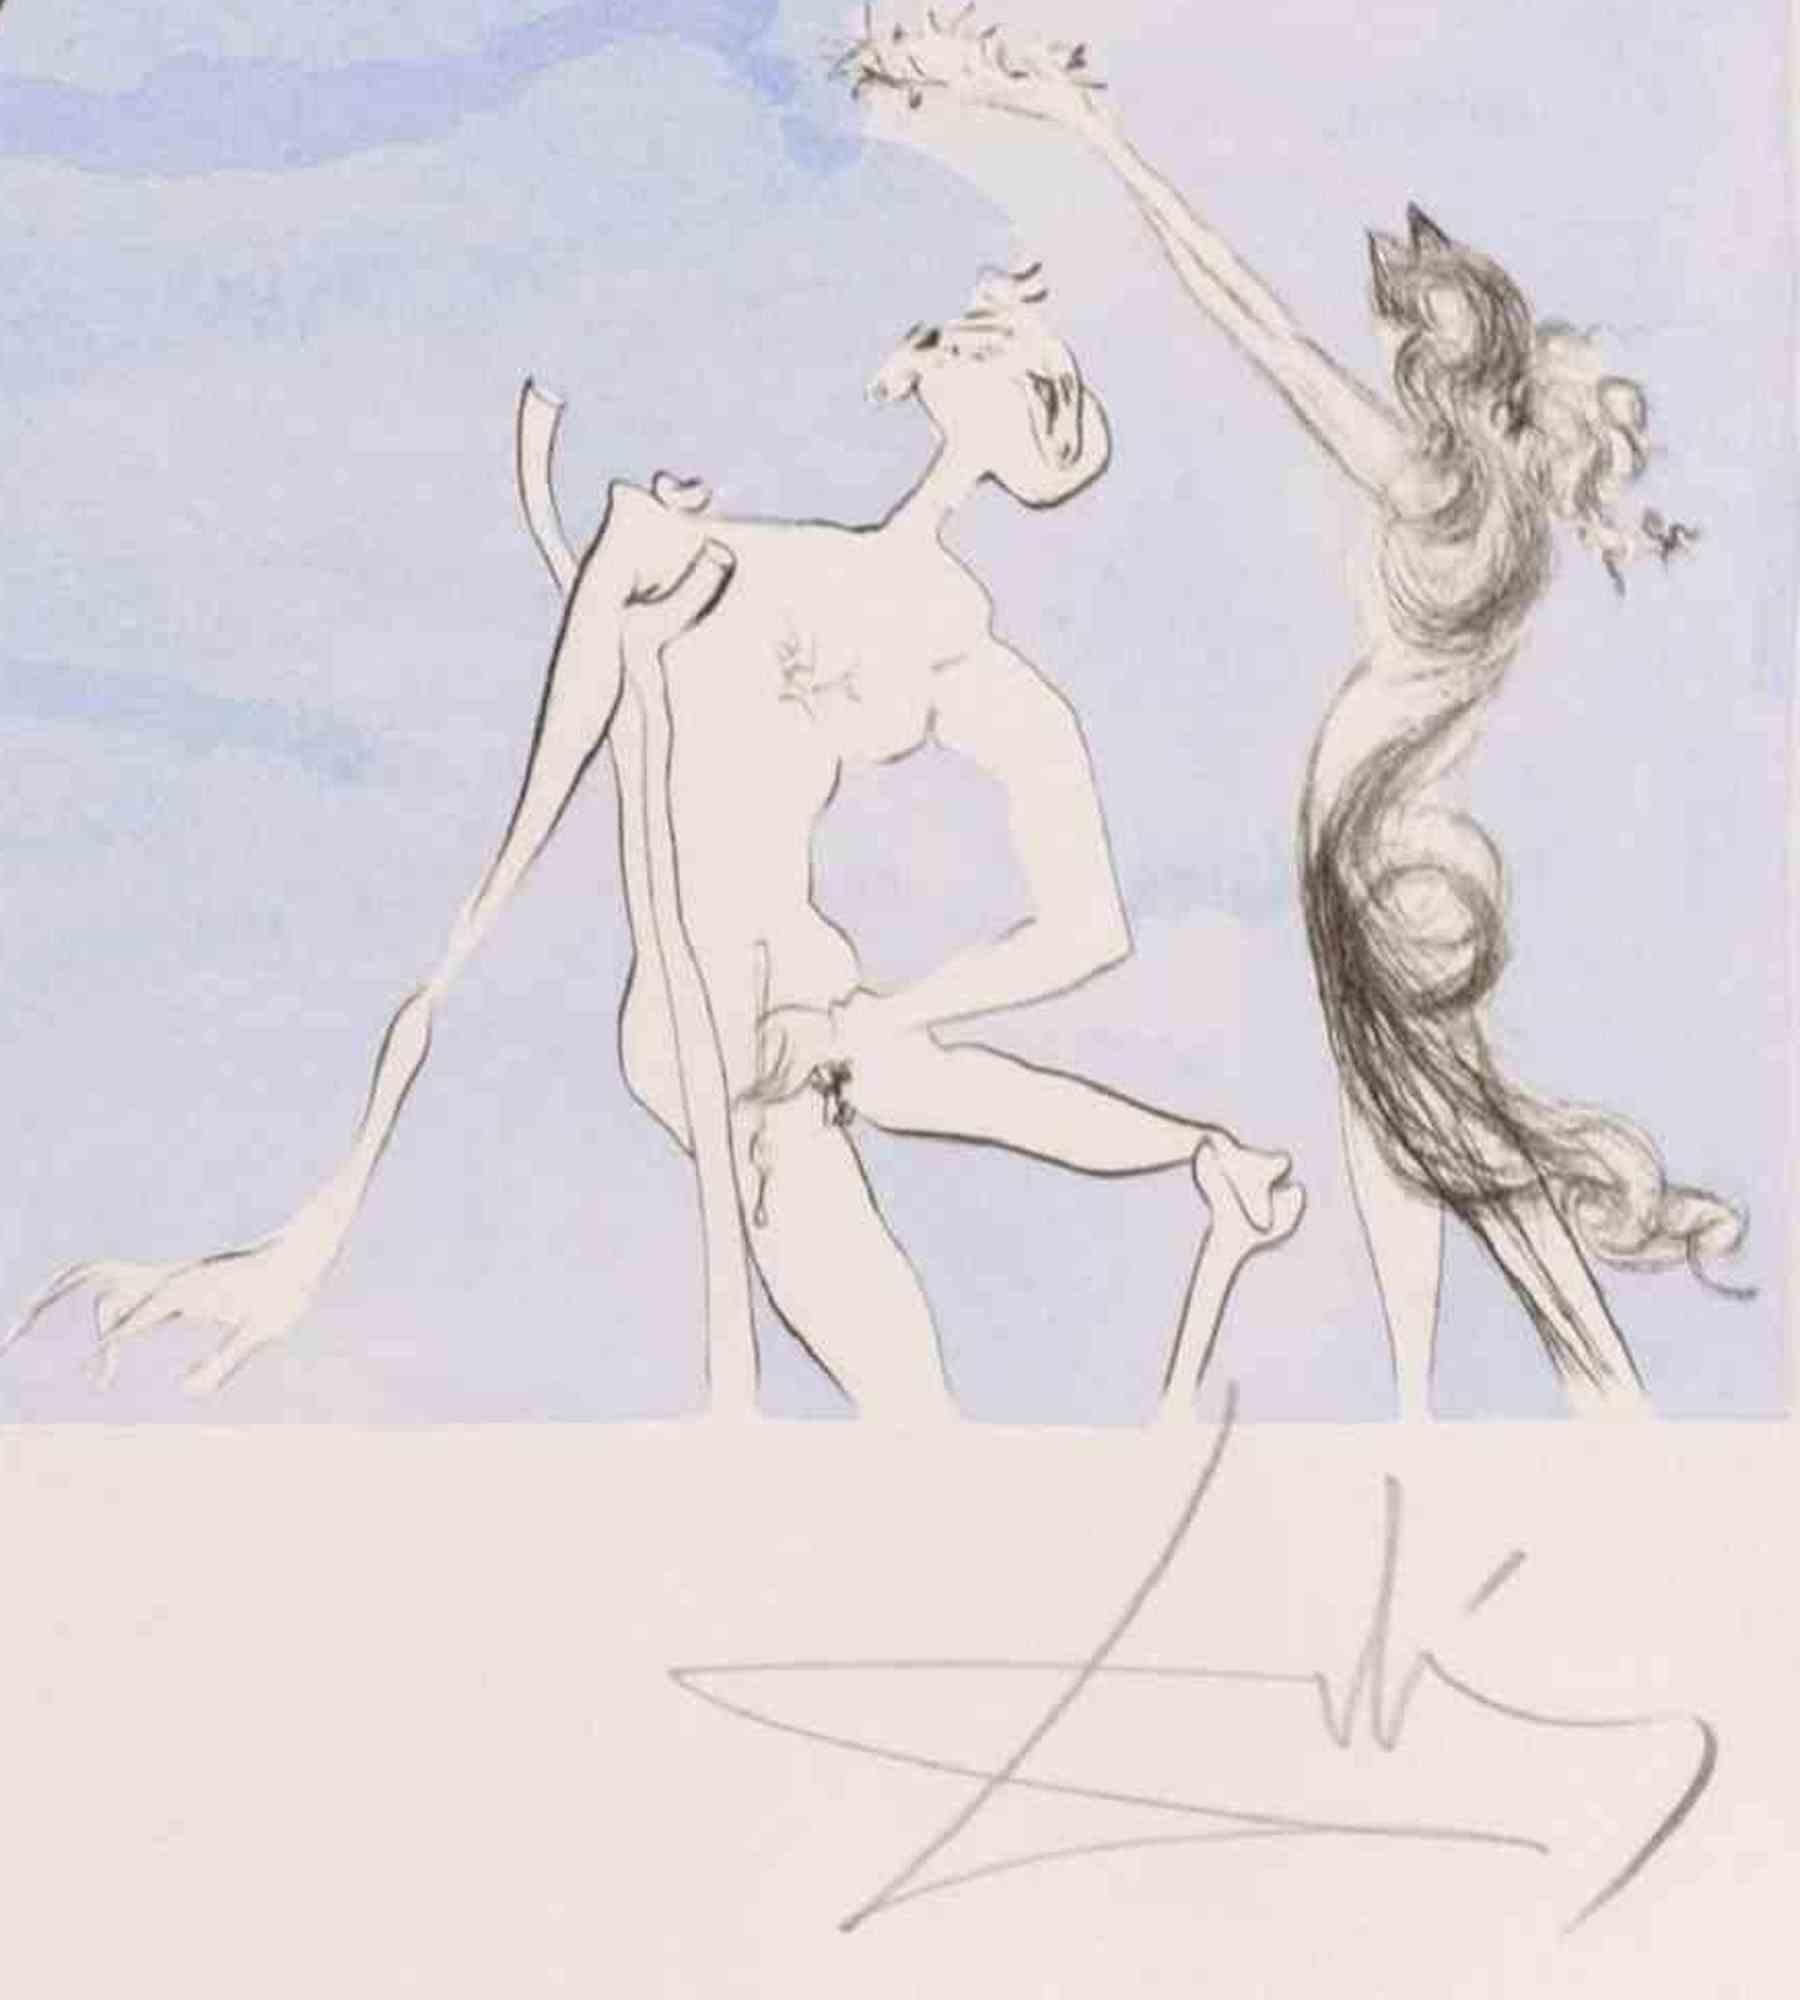 The Laurels of Happiness - Etching attr. to Salvador Dalì - 1971 - Print by Salvador Dalí